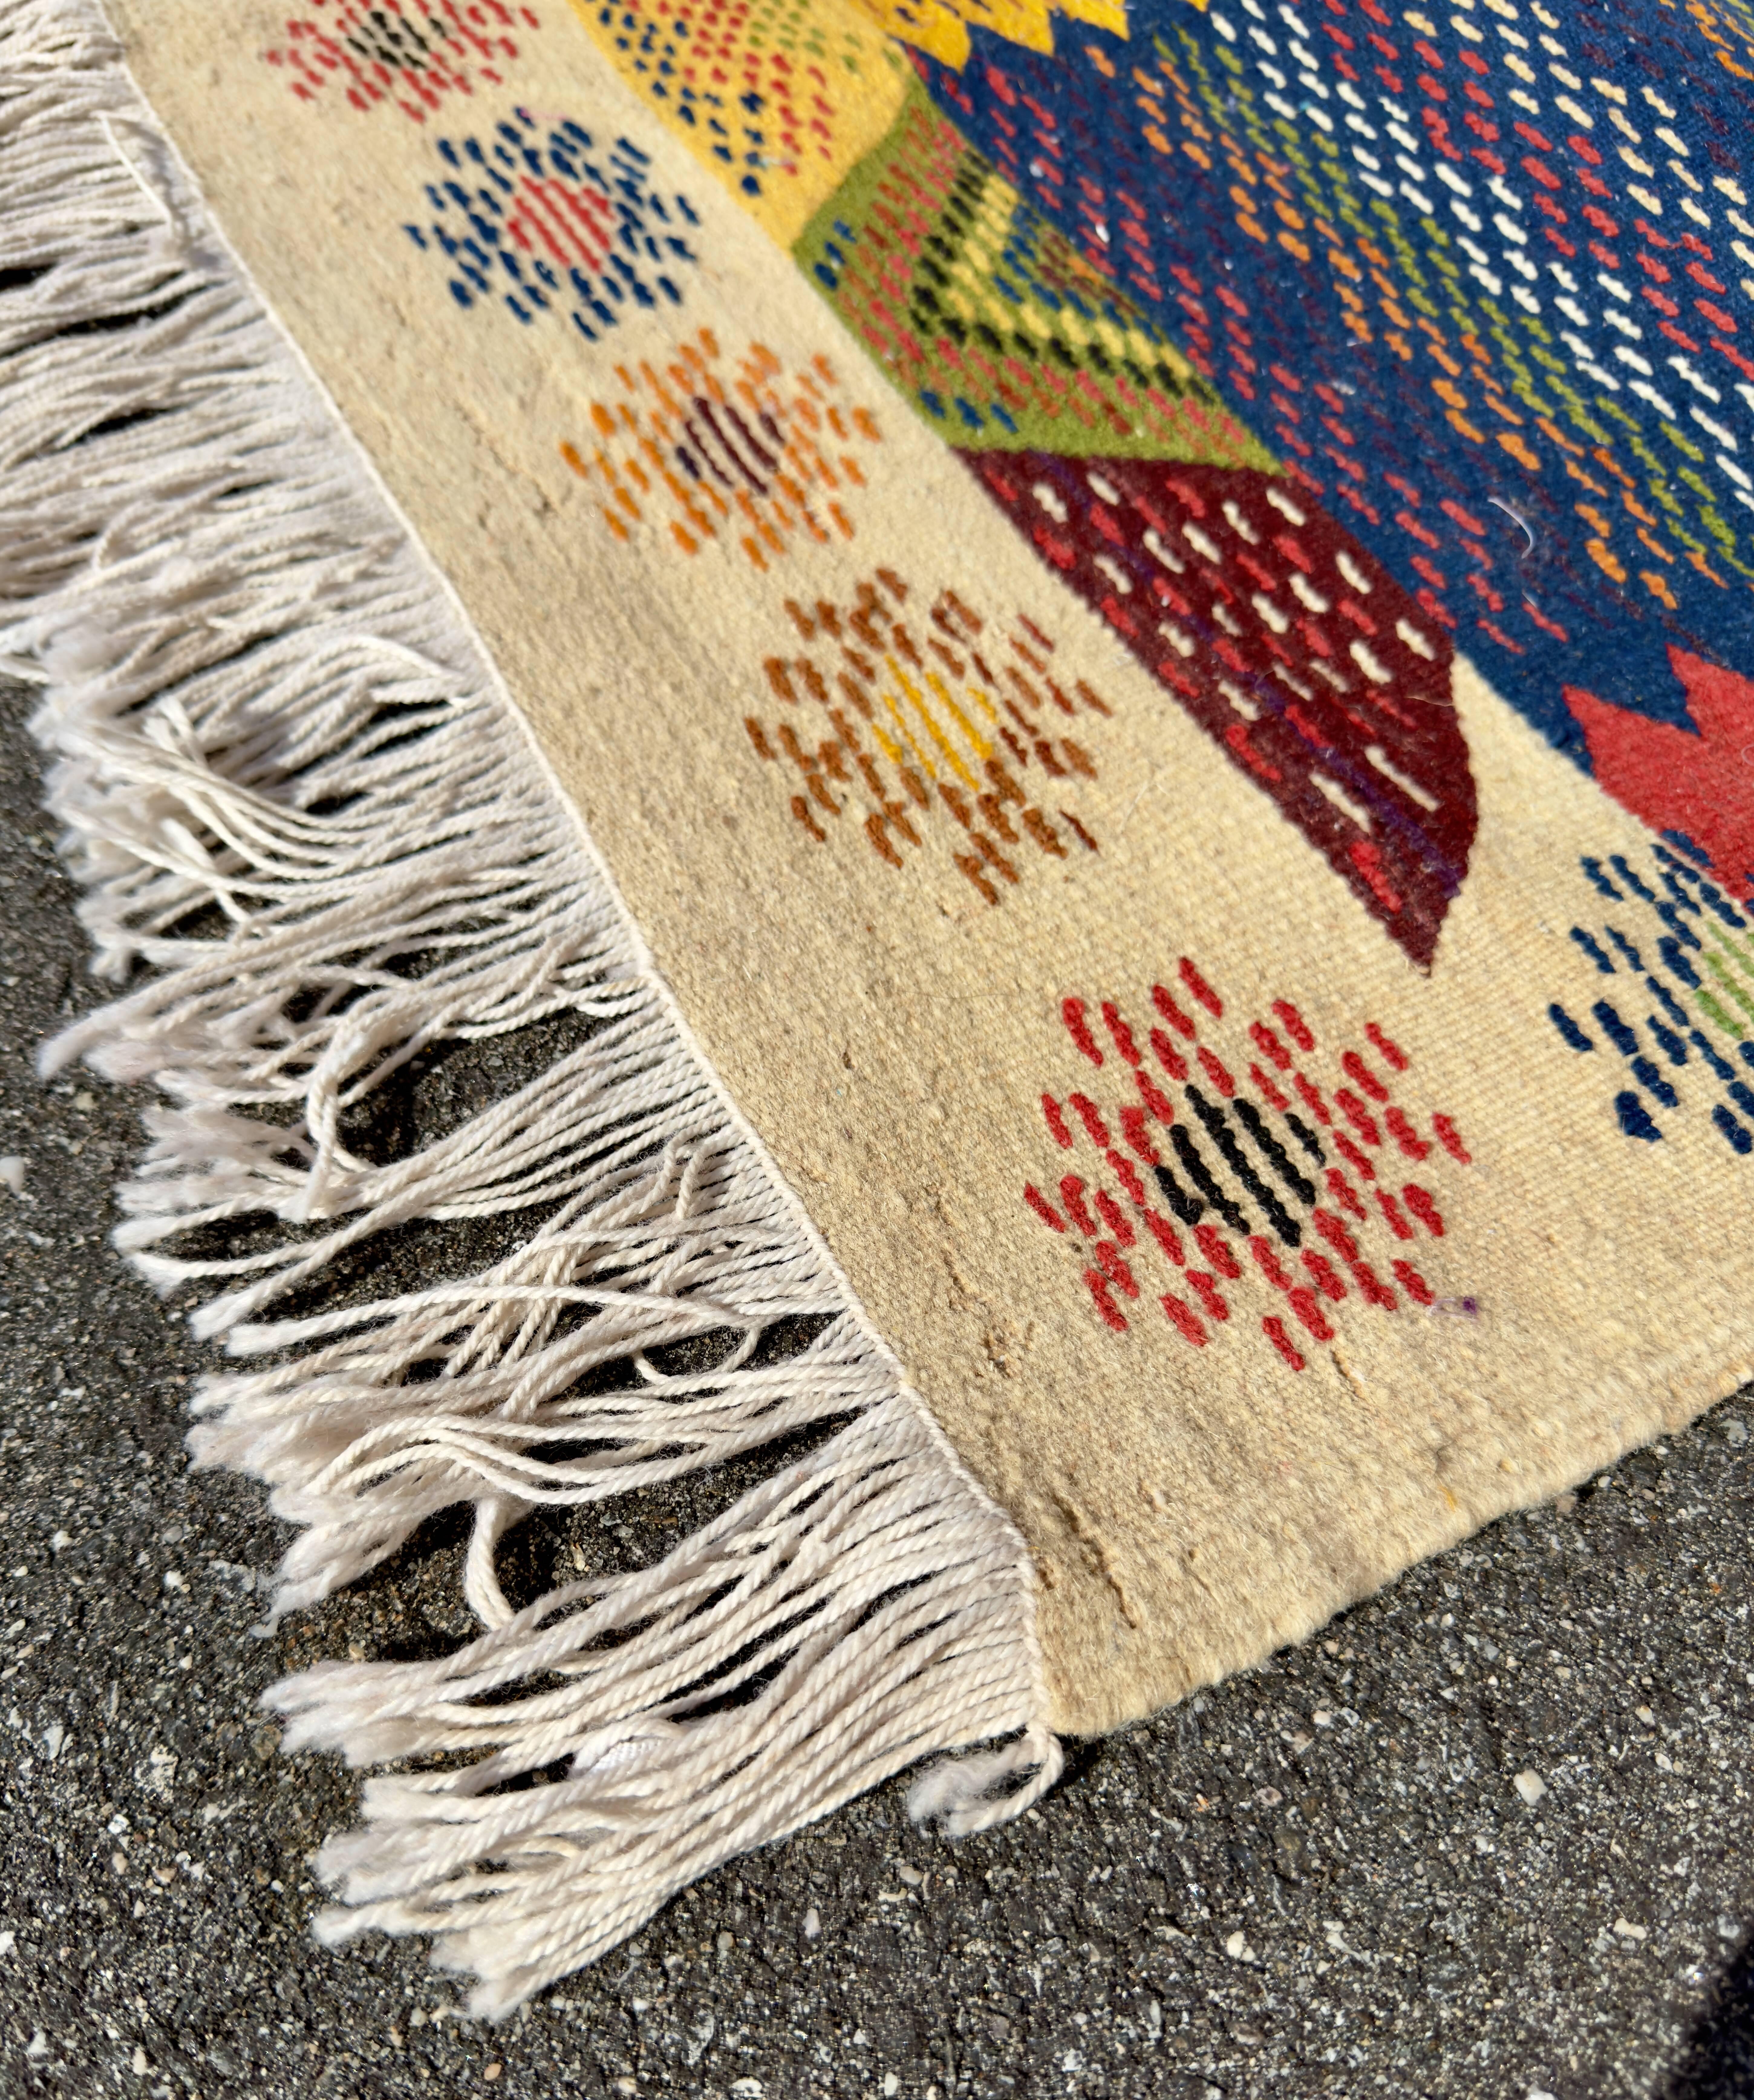 Handwoven Vintage Moroccan Rug in Wool with Organic Multi-Color Dye In Good Condition For Sale In Plainview, NY